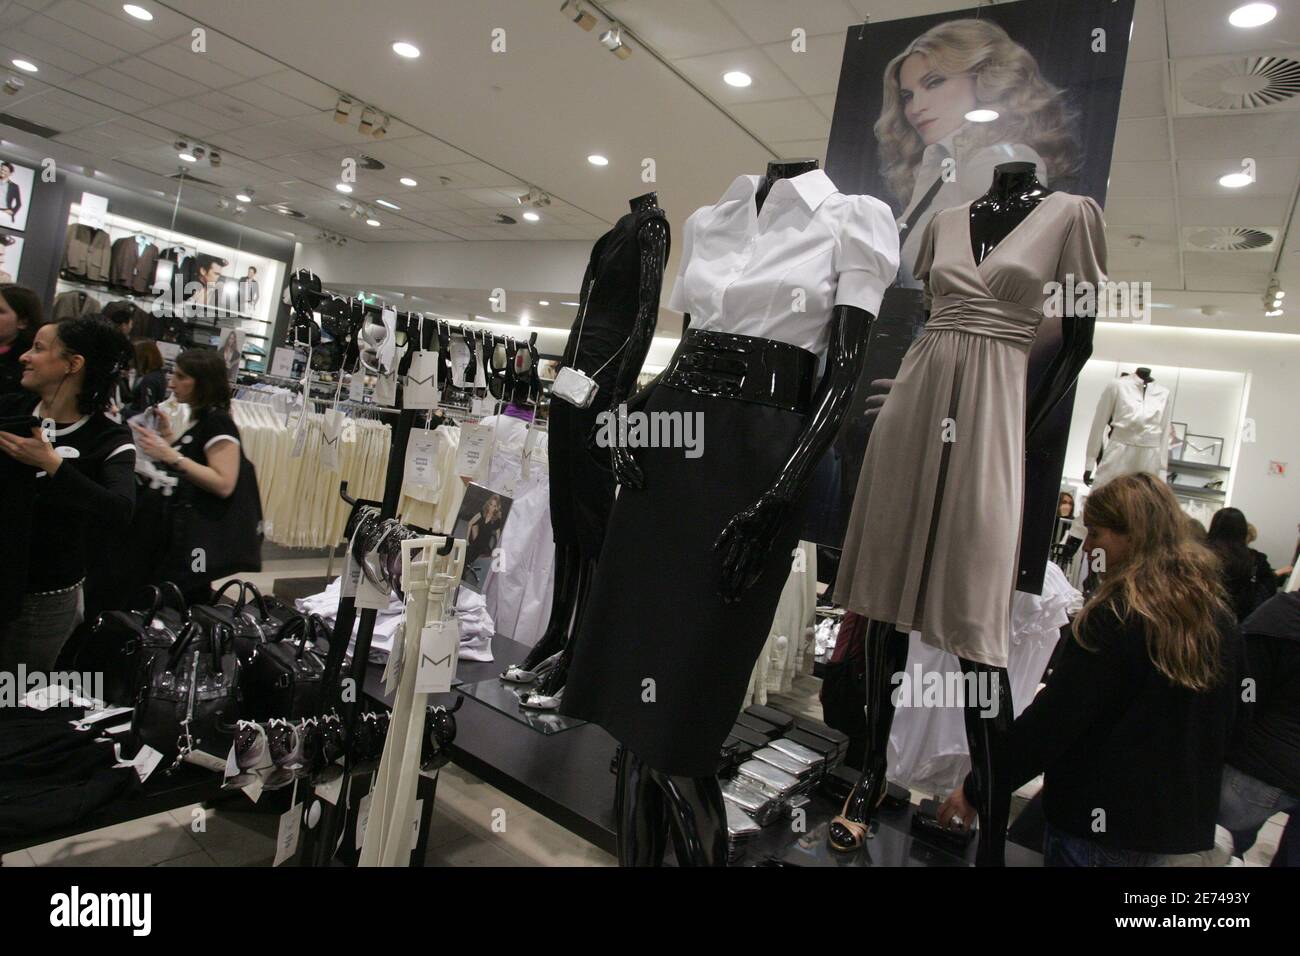 Shoppers at the H & M store on Boulevard Haussmann, Paris, France, on March  22, 2007, for the launch of Madonna's 'M By Madonna' fashion collection.  Photo by Mousse/ABACAPRESS.COM Stock Photo -